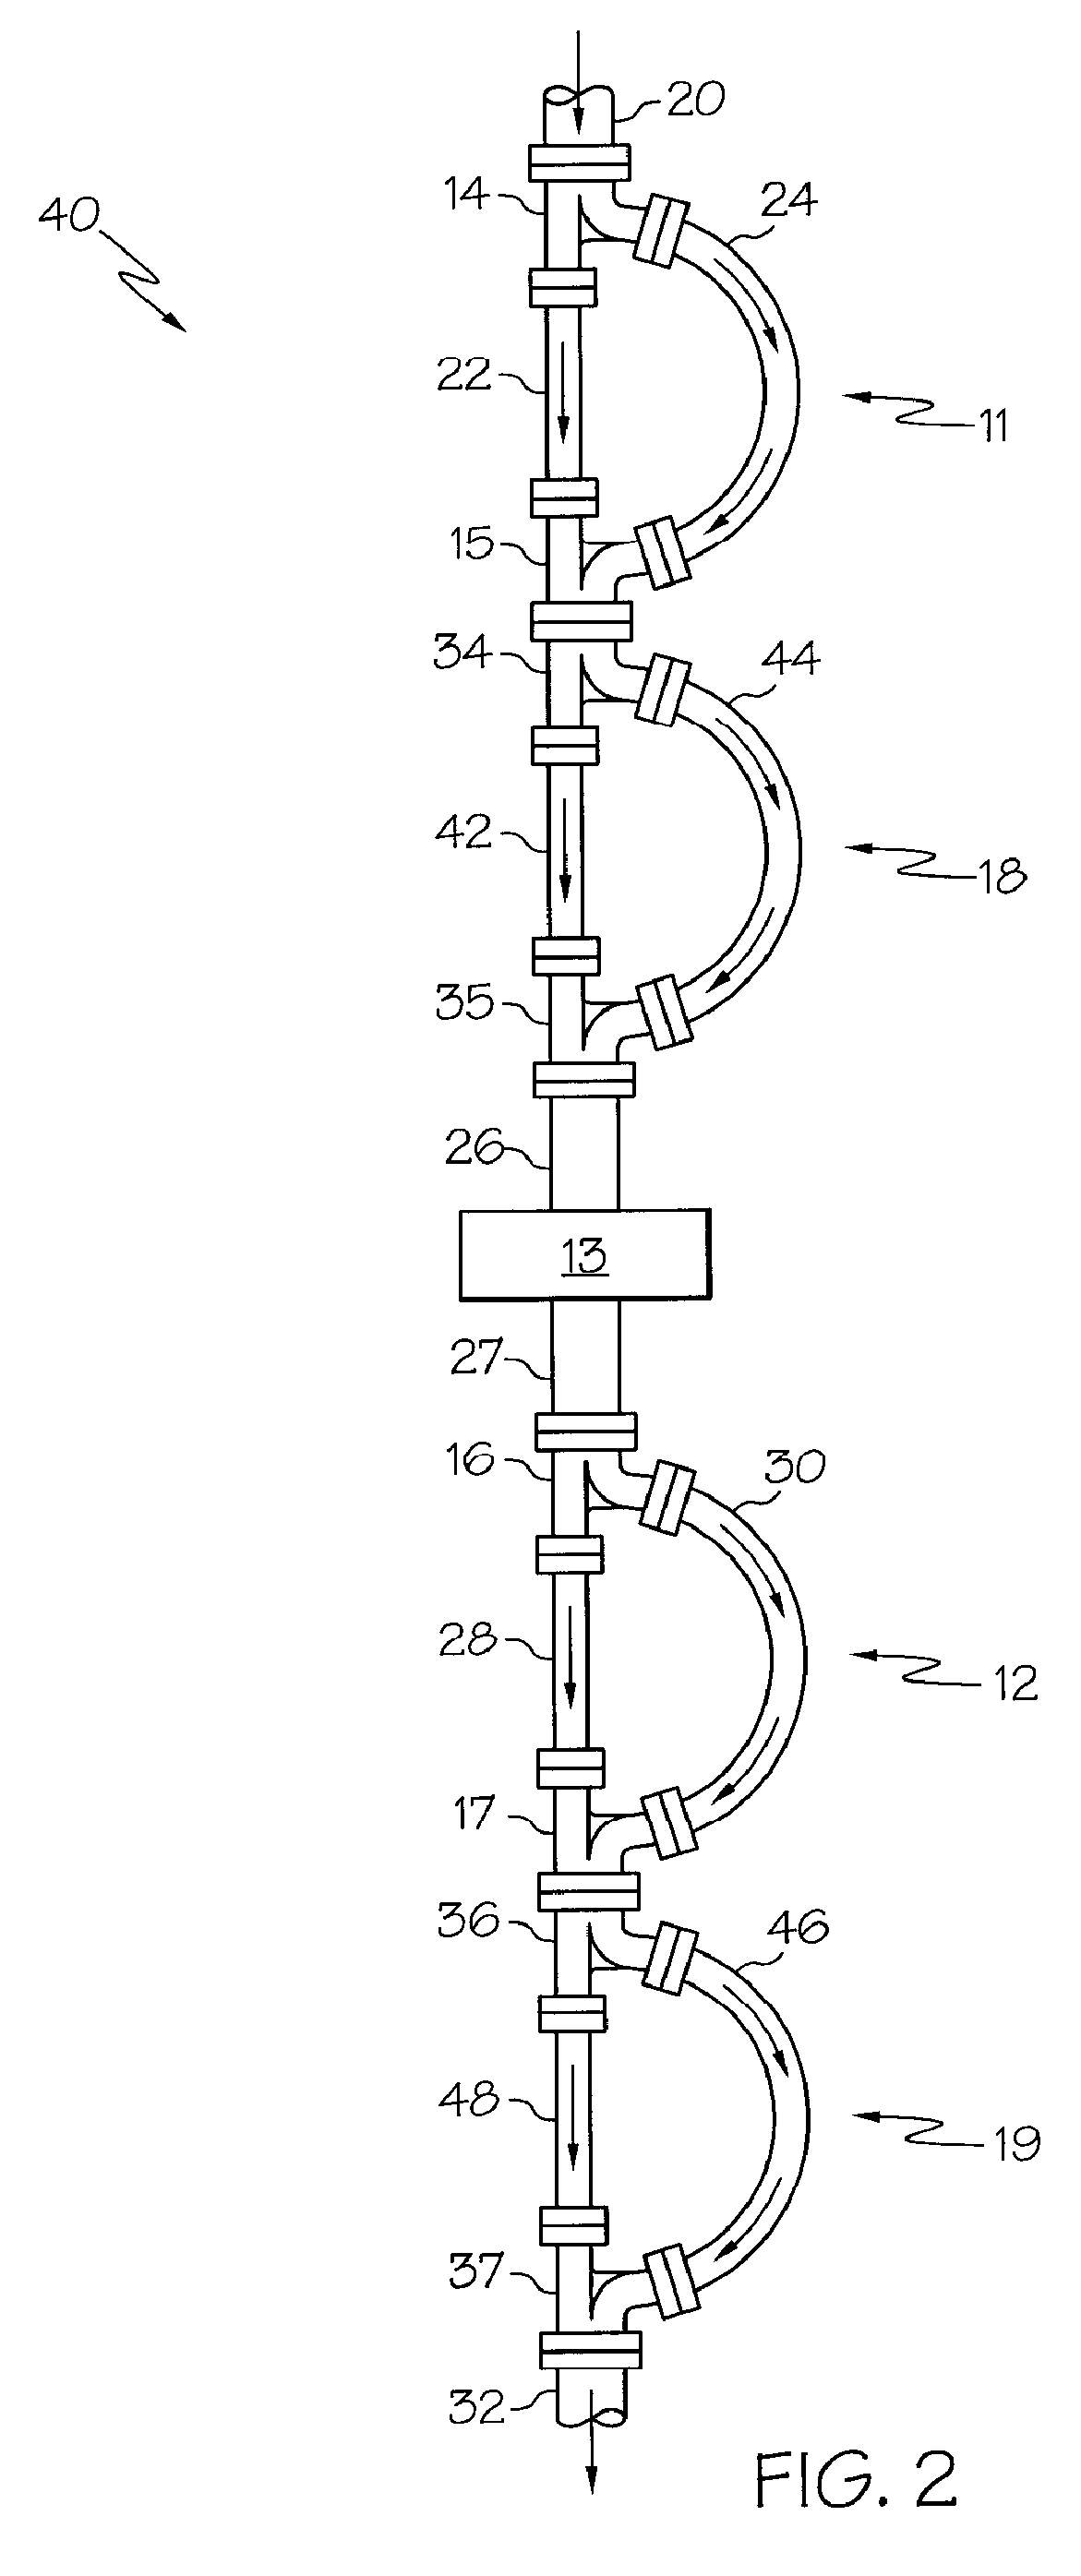 Branching Device for a Pulsation Attenuation Network